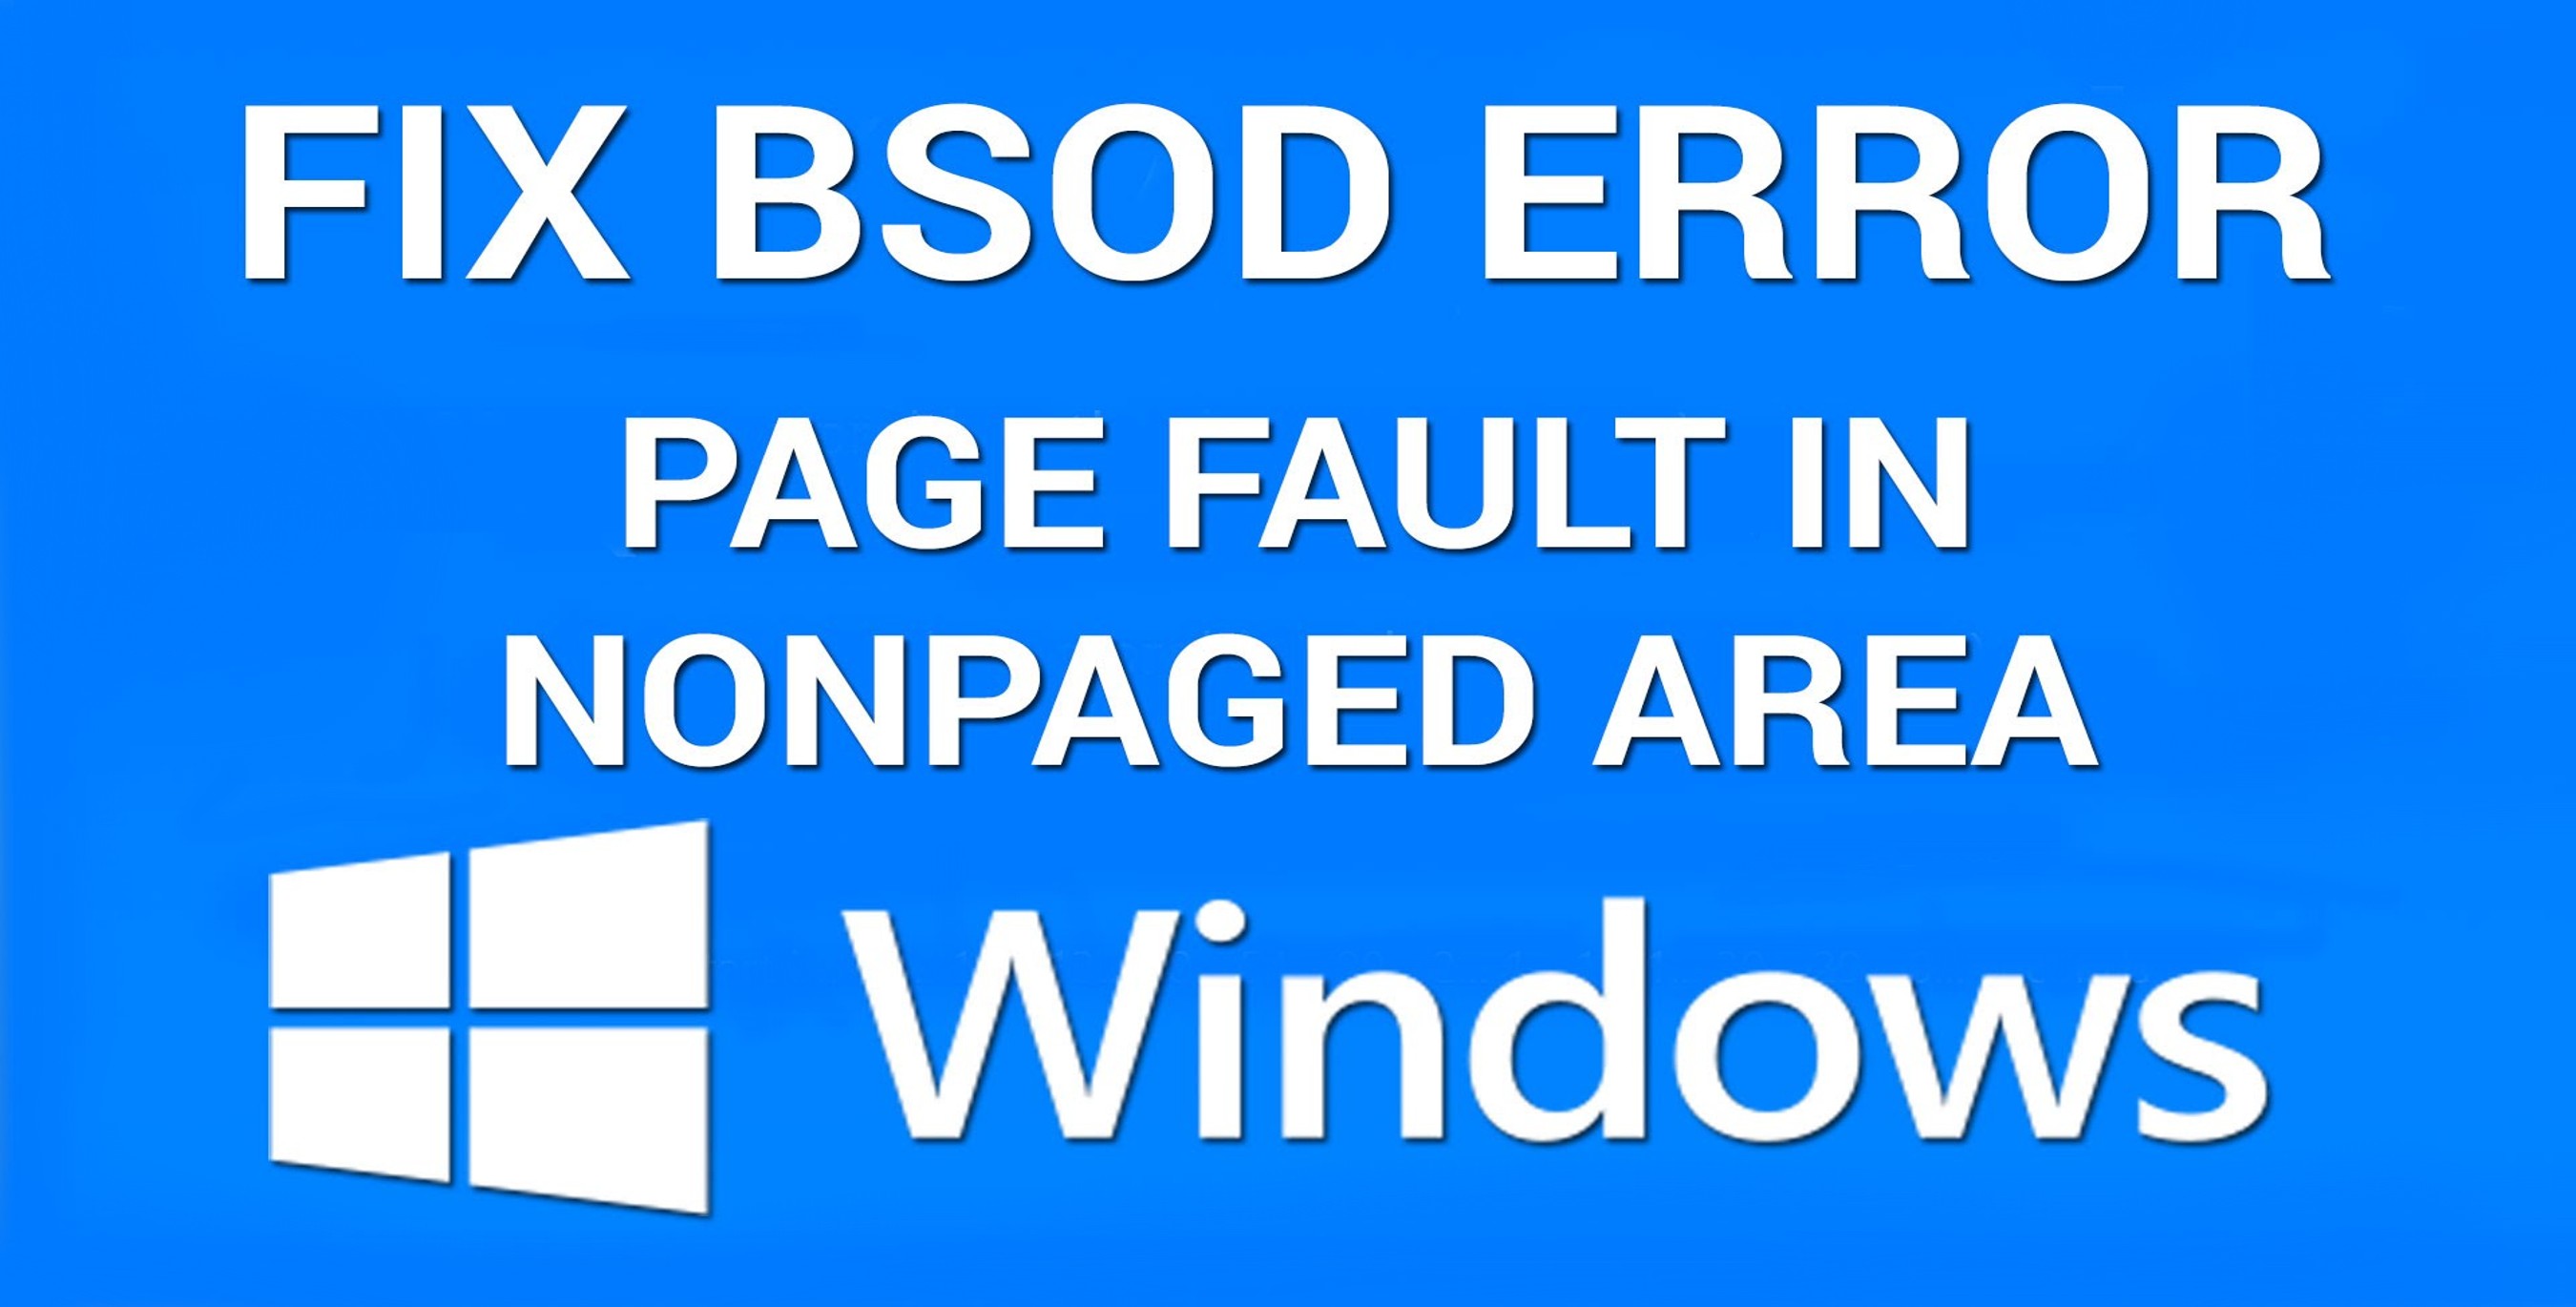 Page Fault in NONPAGED area Windows 10. Page_Fault_in_NONPAGED_area Windows 7. BSOD. How to Fix BSOD. Ошибка page fault in nonpaged